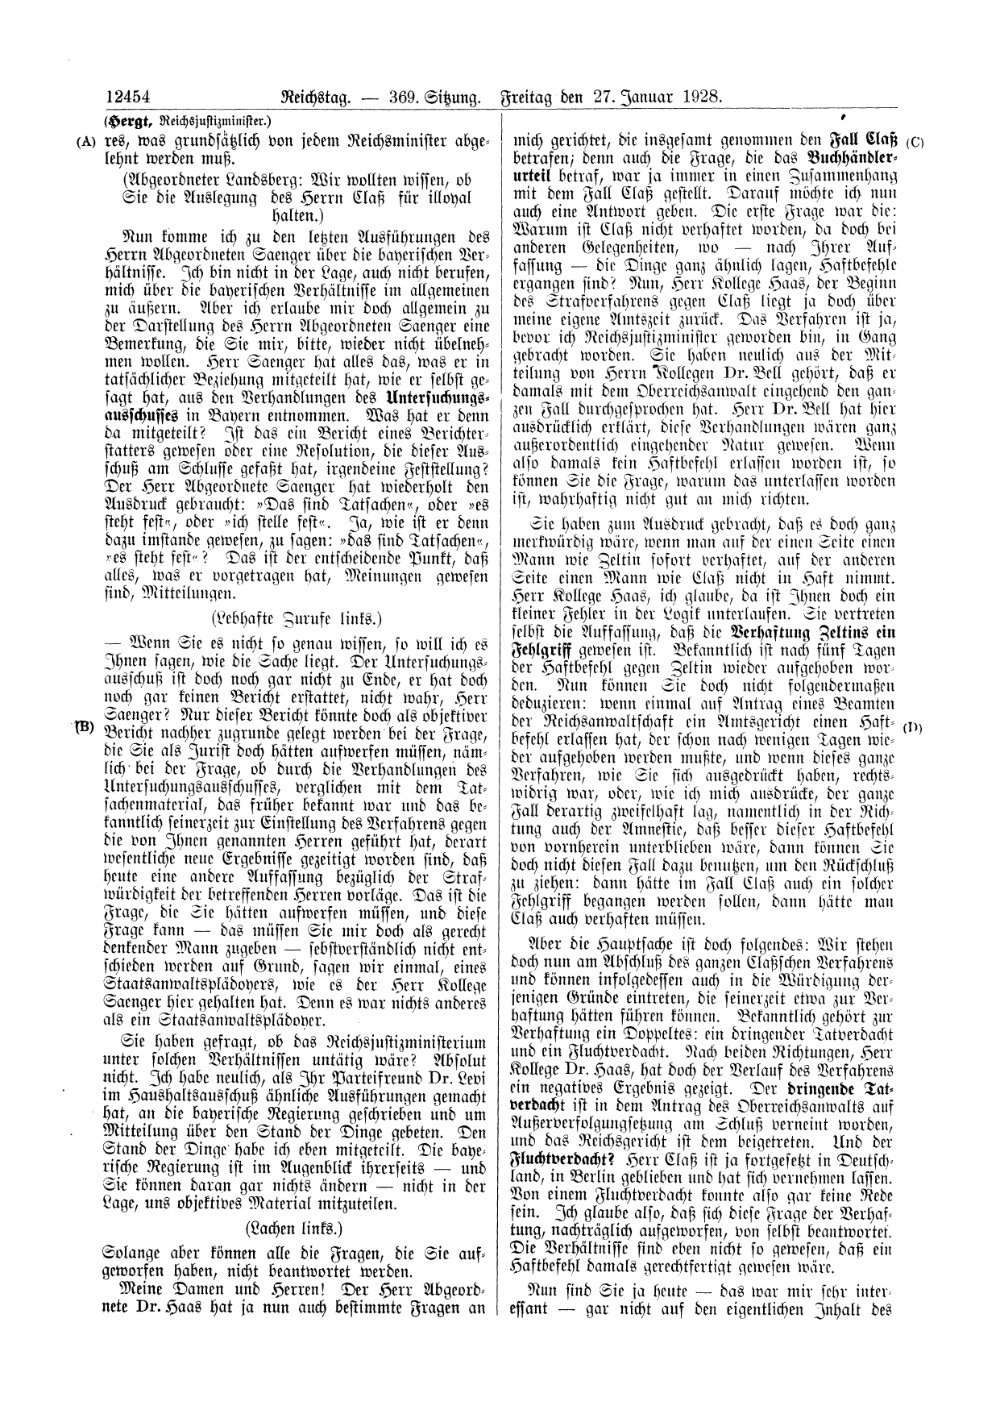 Scan of page 12454